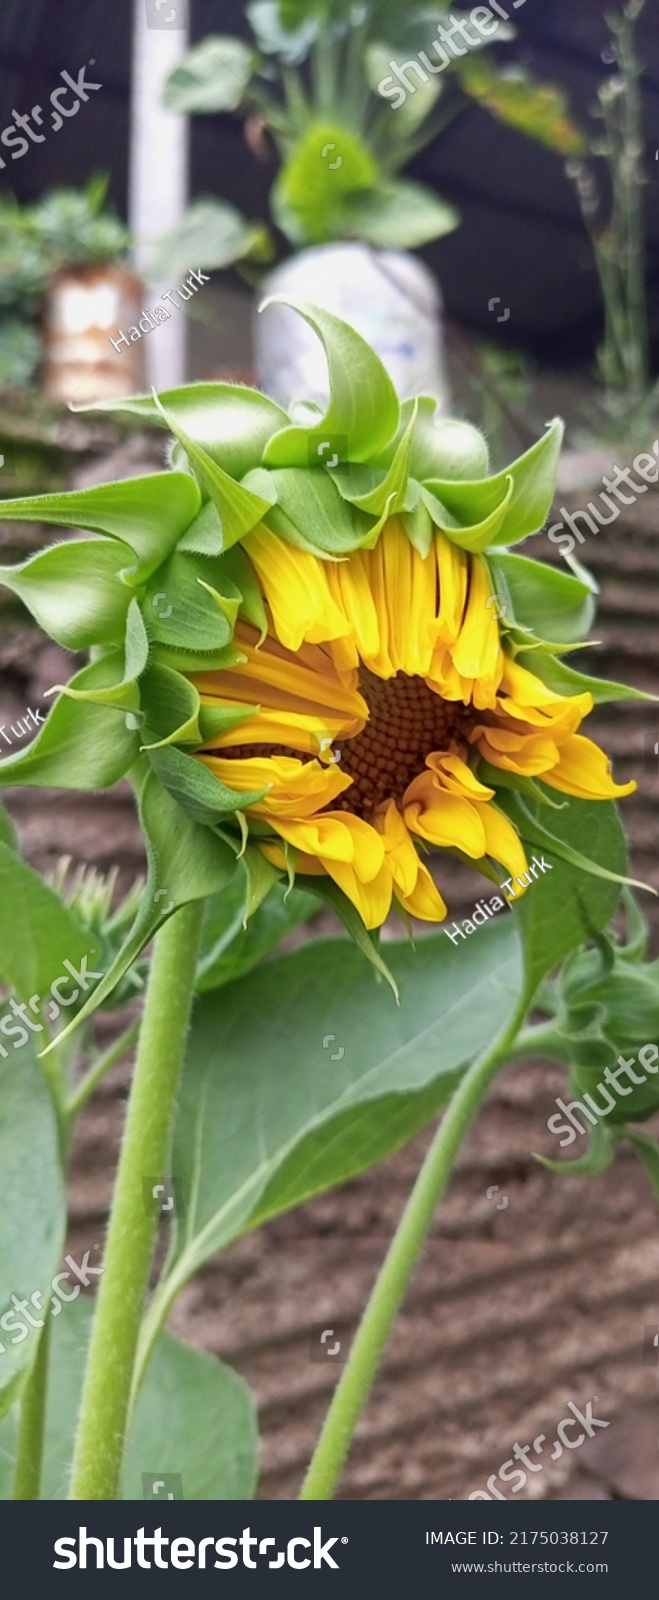 Stock Photo Sunflower With Blur Background In Chinese Culture Sunflowers Are Said To Mean Good Luck And 2175038127 